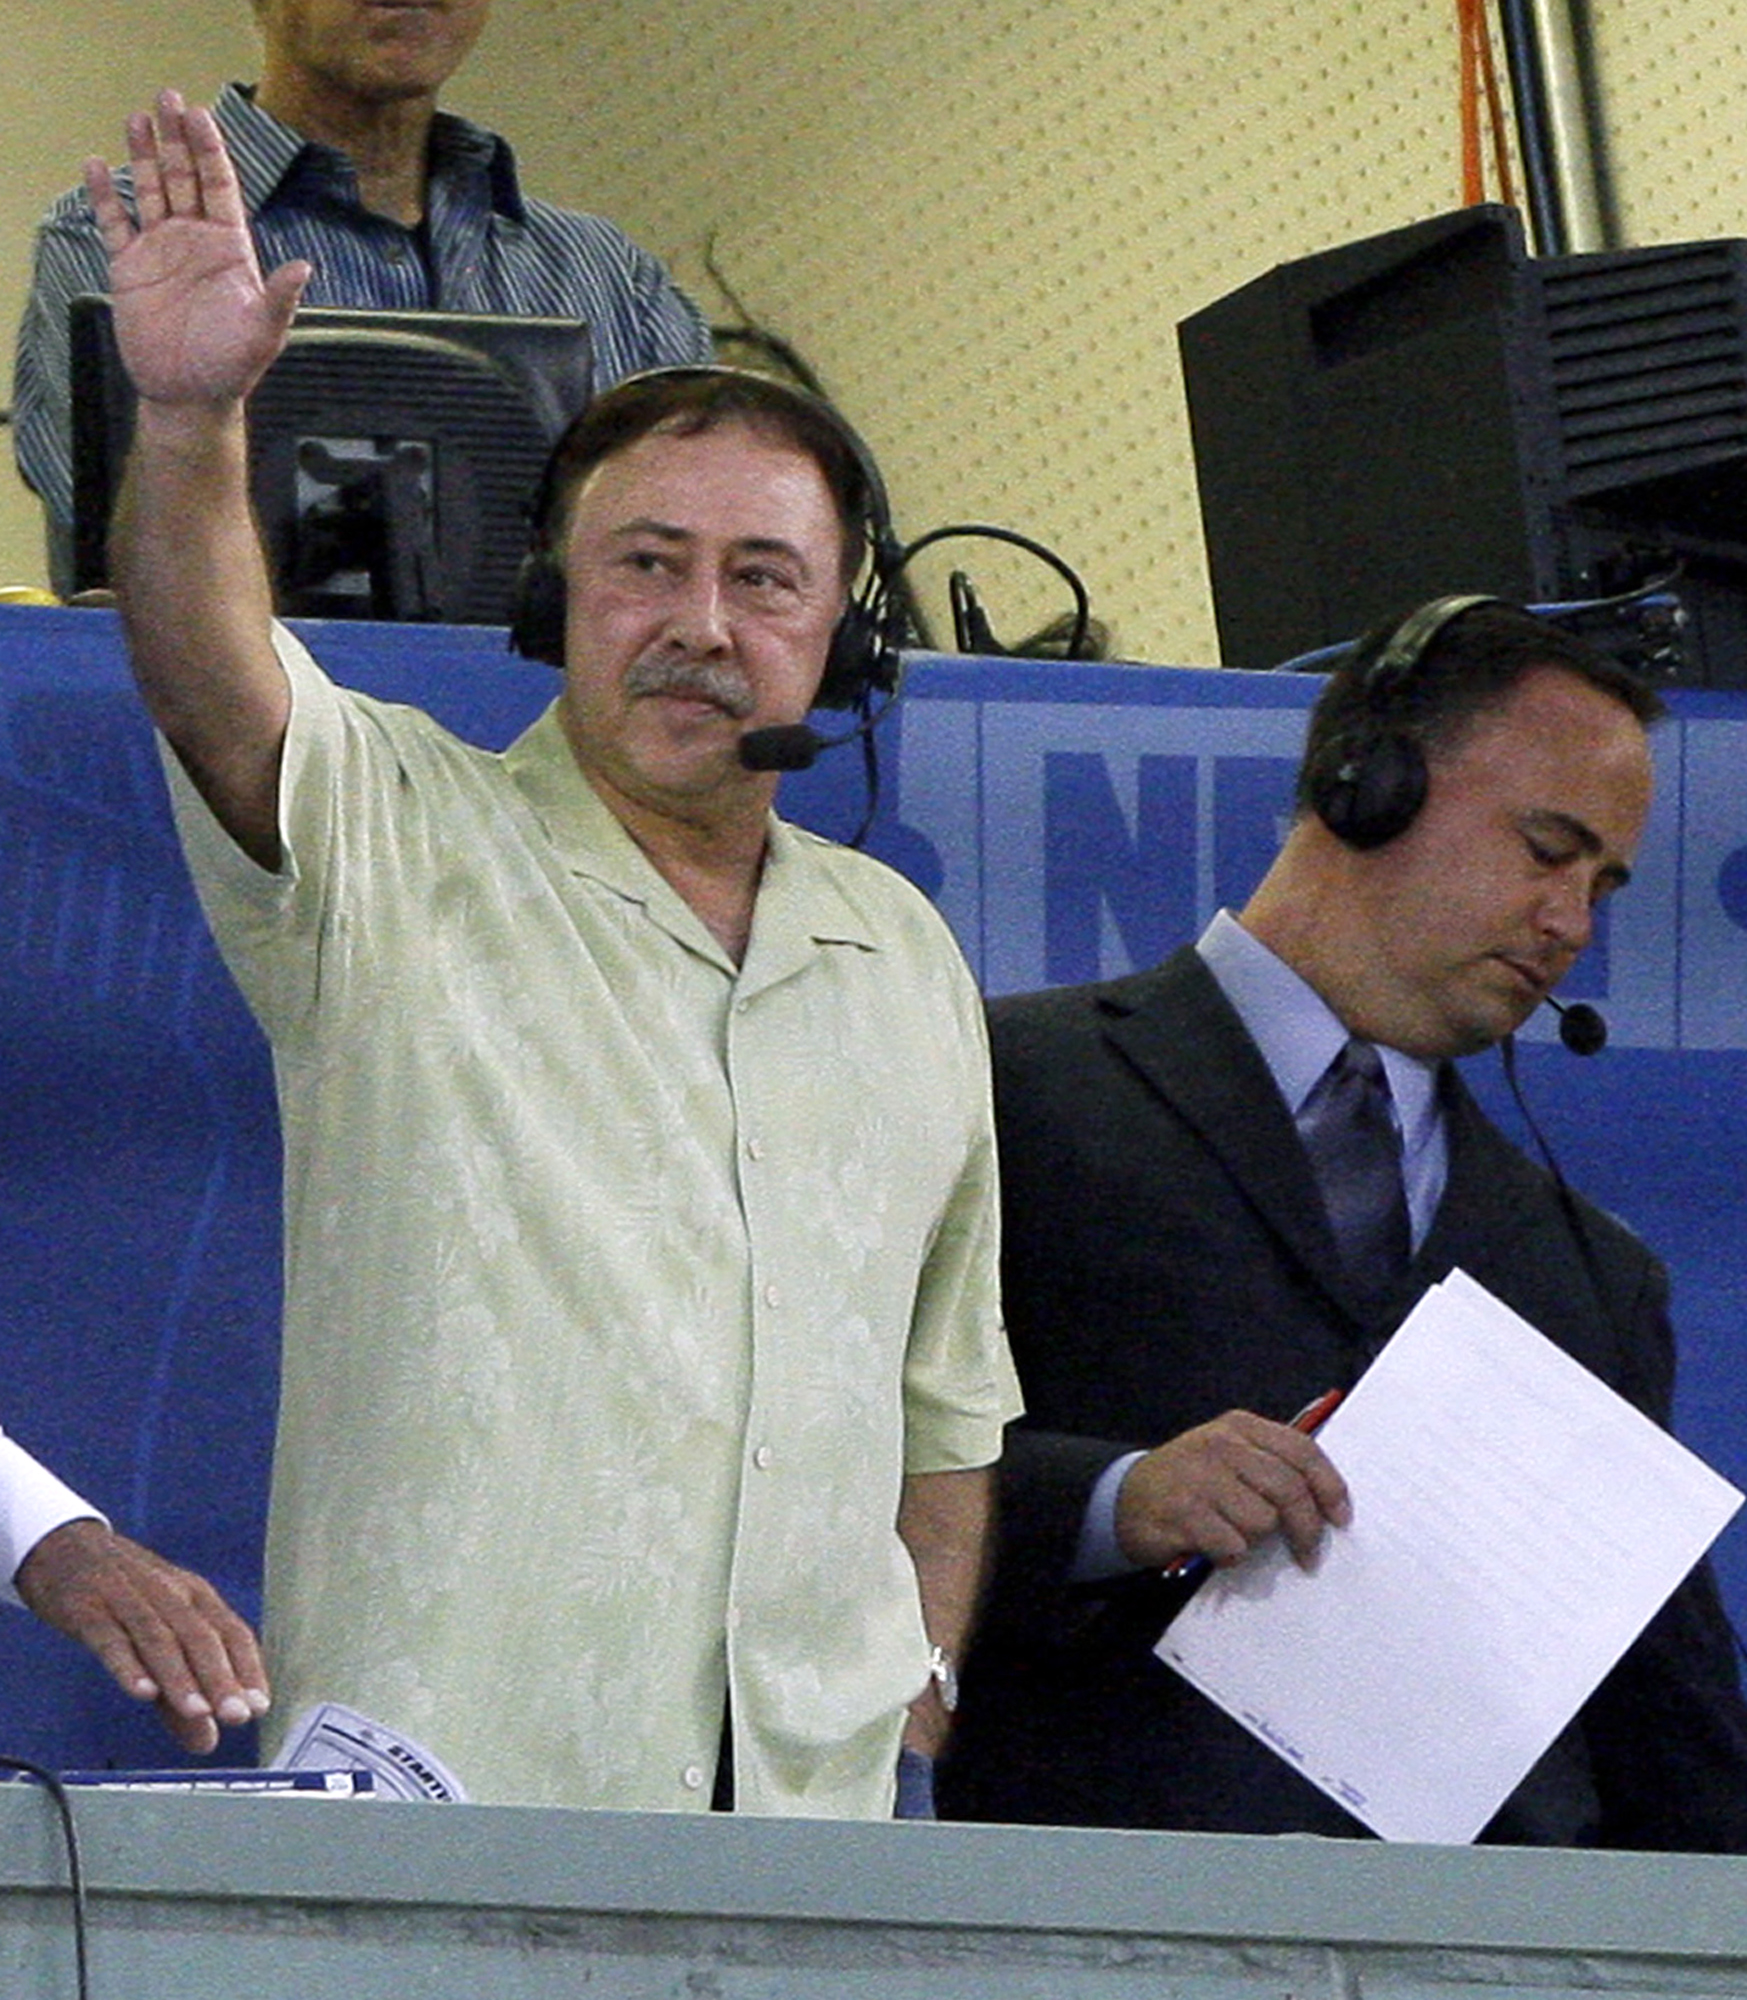 In this Aug. 12, 2009 file photo, Boston Red Sox announcer Jerry Remy waves to the crowd from the television broadcast booth at Fenway Park. AP Photo/Elise Amendola, File.